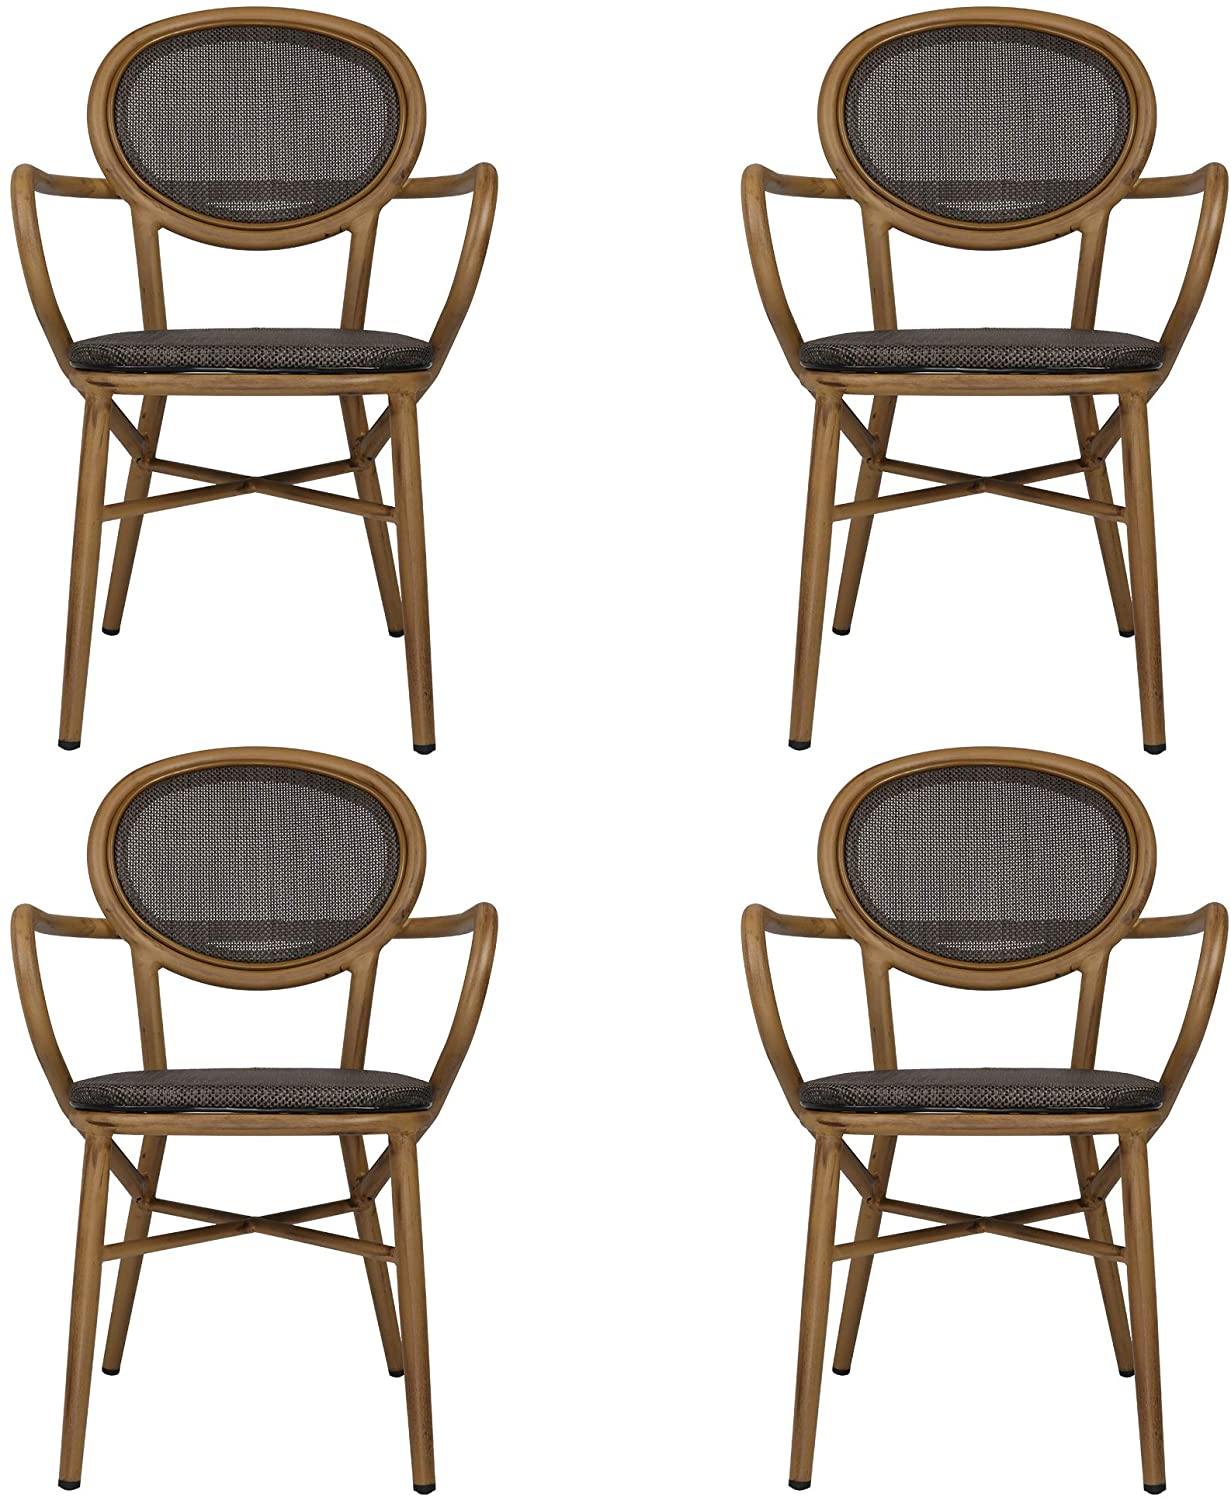 Outdoor Rattan Leisure Chairs Garden Patio Chair Set, Metal Chair Frame with Textilene Seat, Set of 4, Armless - Bosonshop